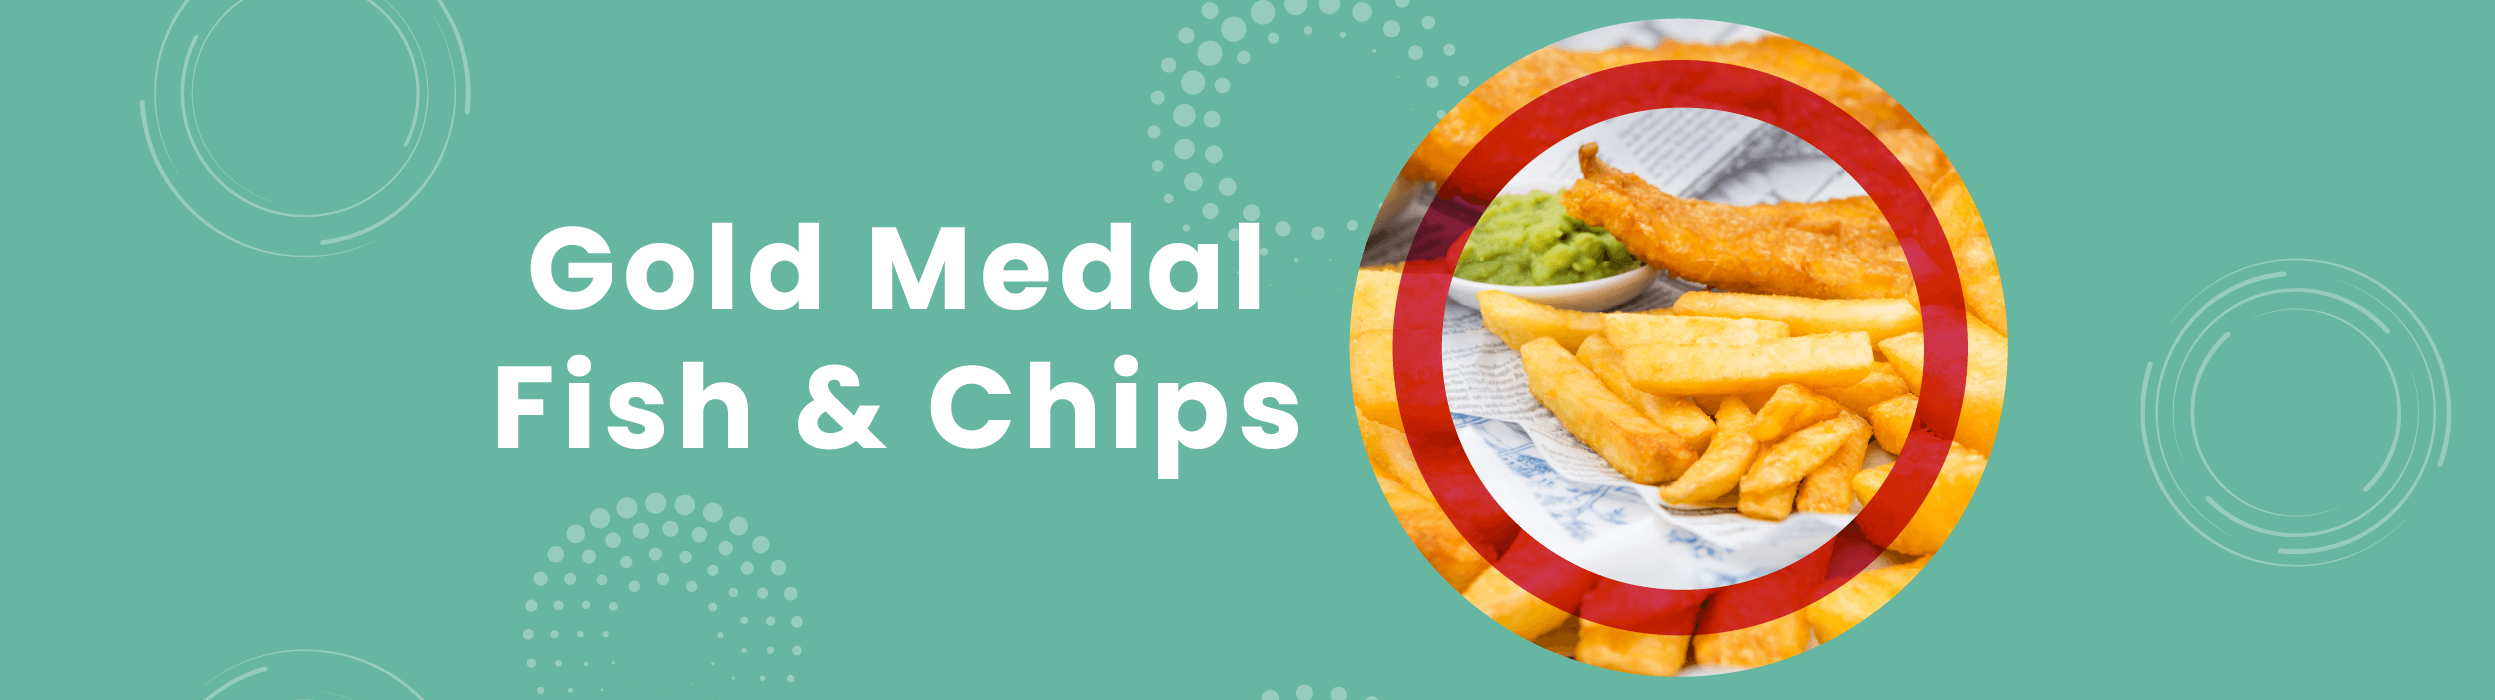 gold-medal-fish-and-chips